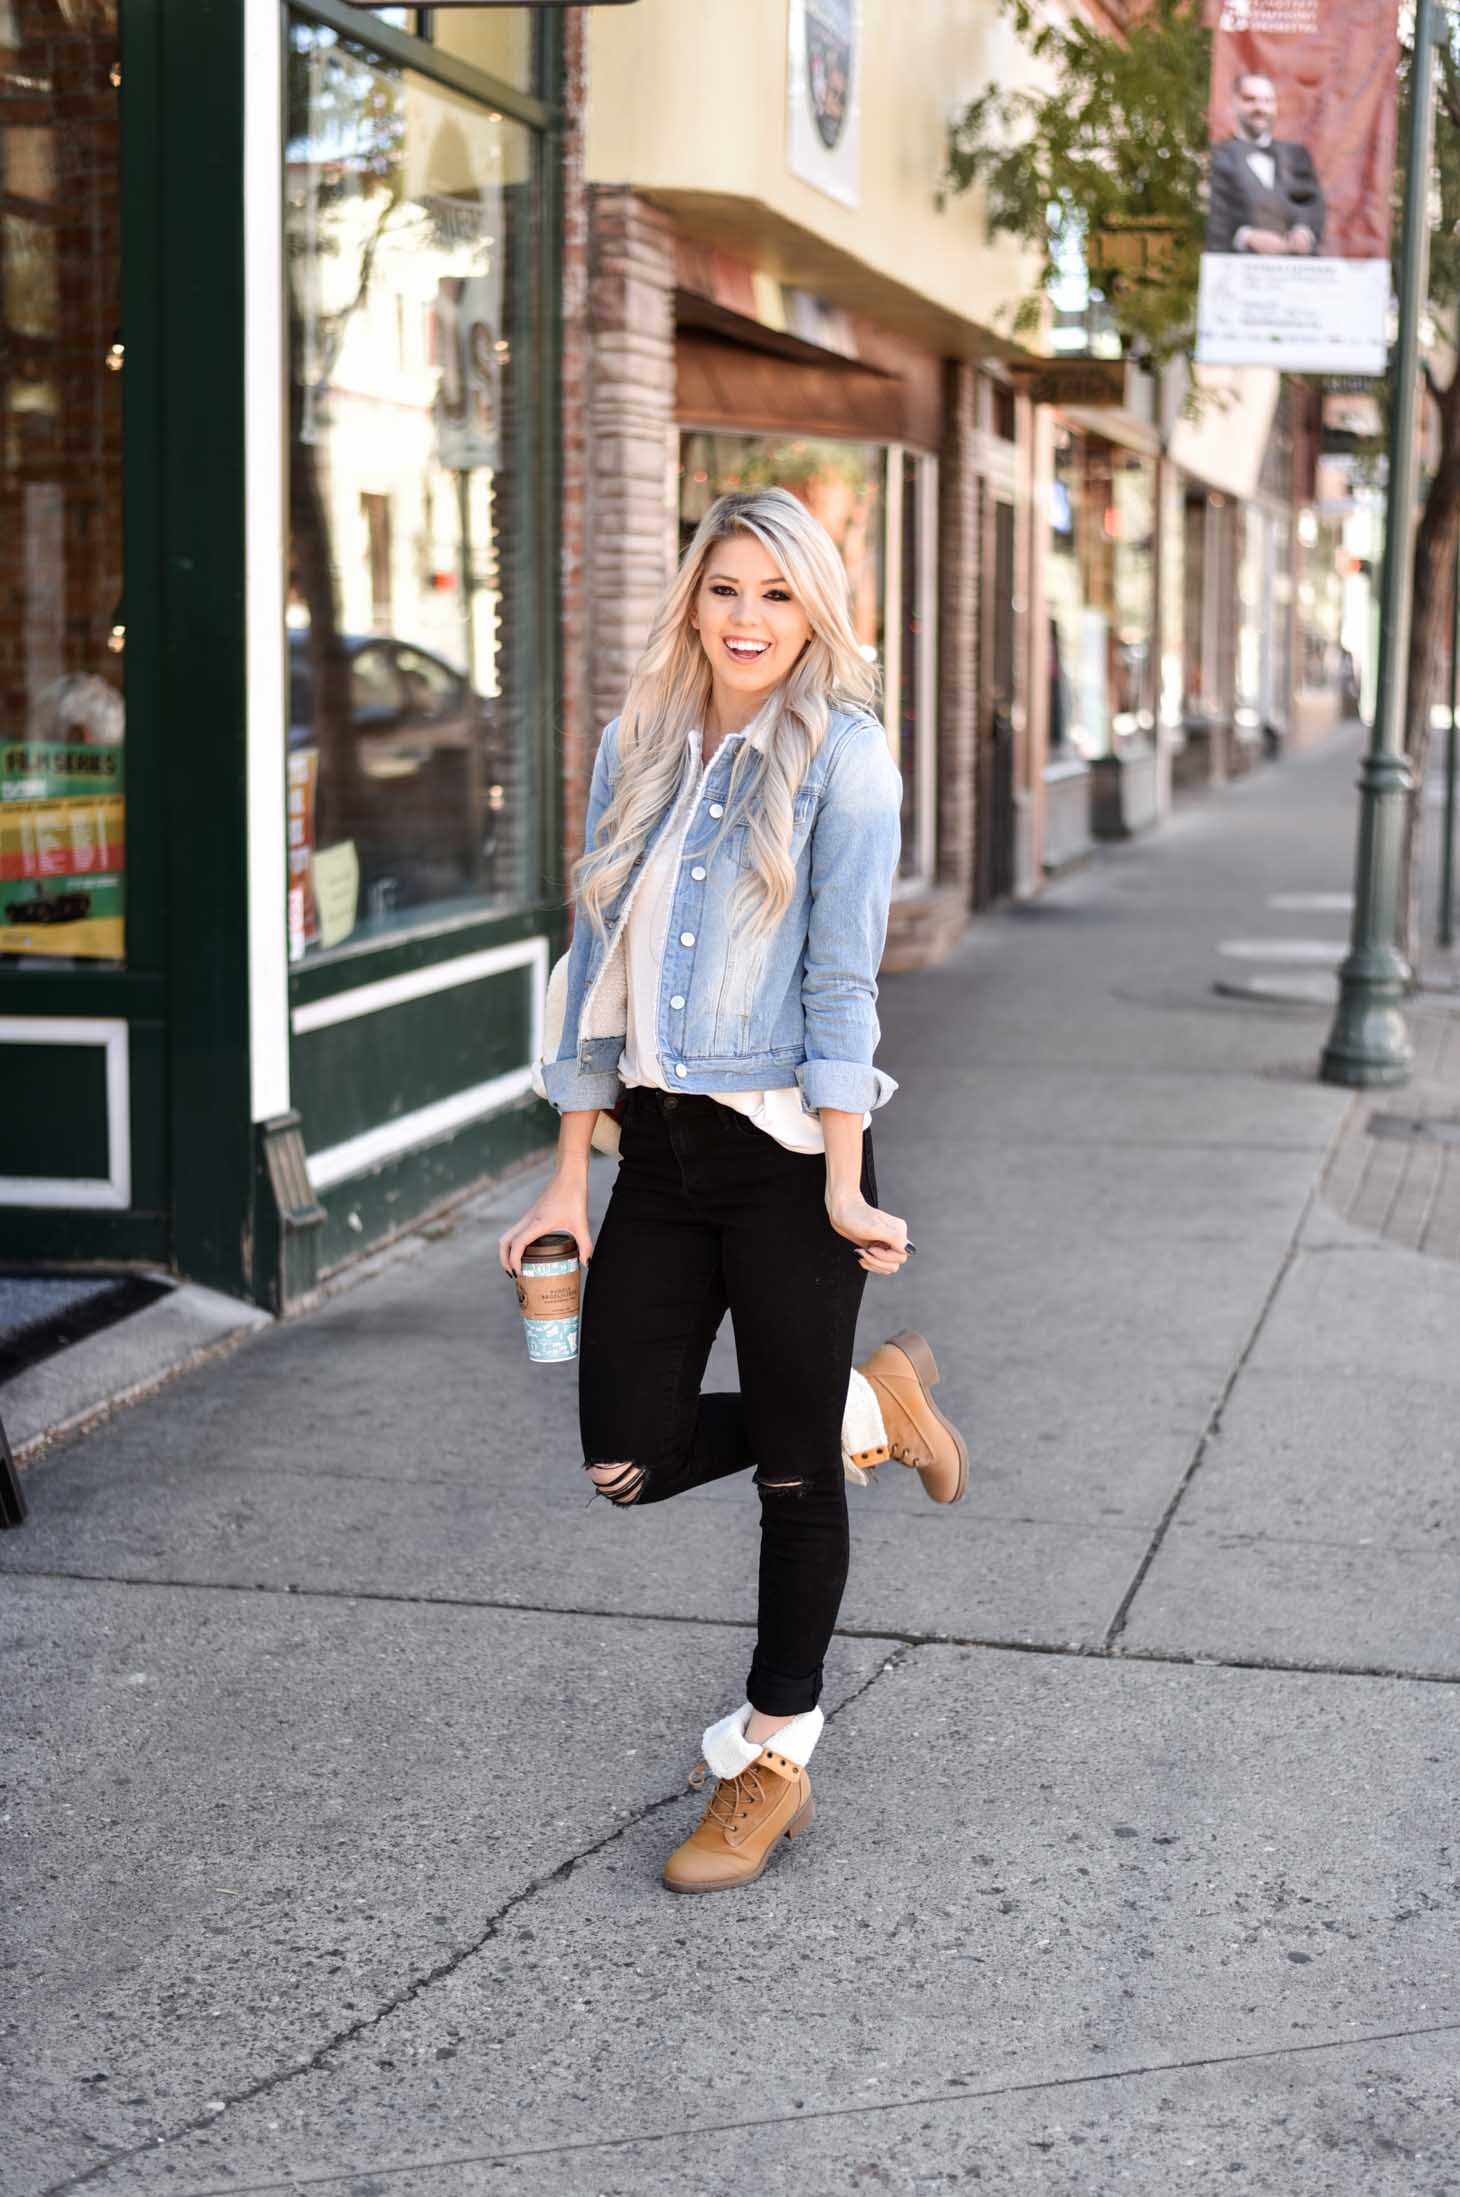 Erin Elizabeth of Wink and a Twirl shares a day and night look for Fall with Discovery Clothing